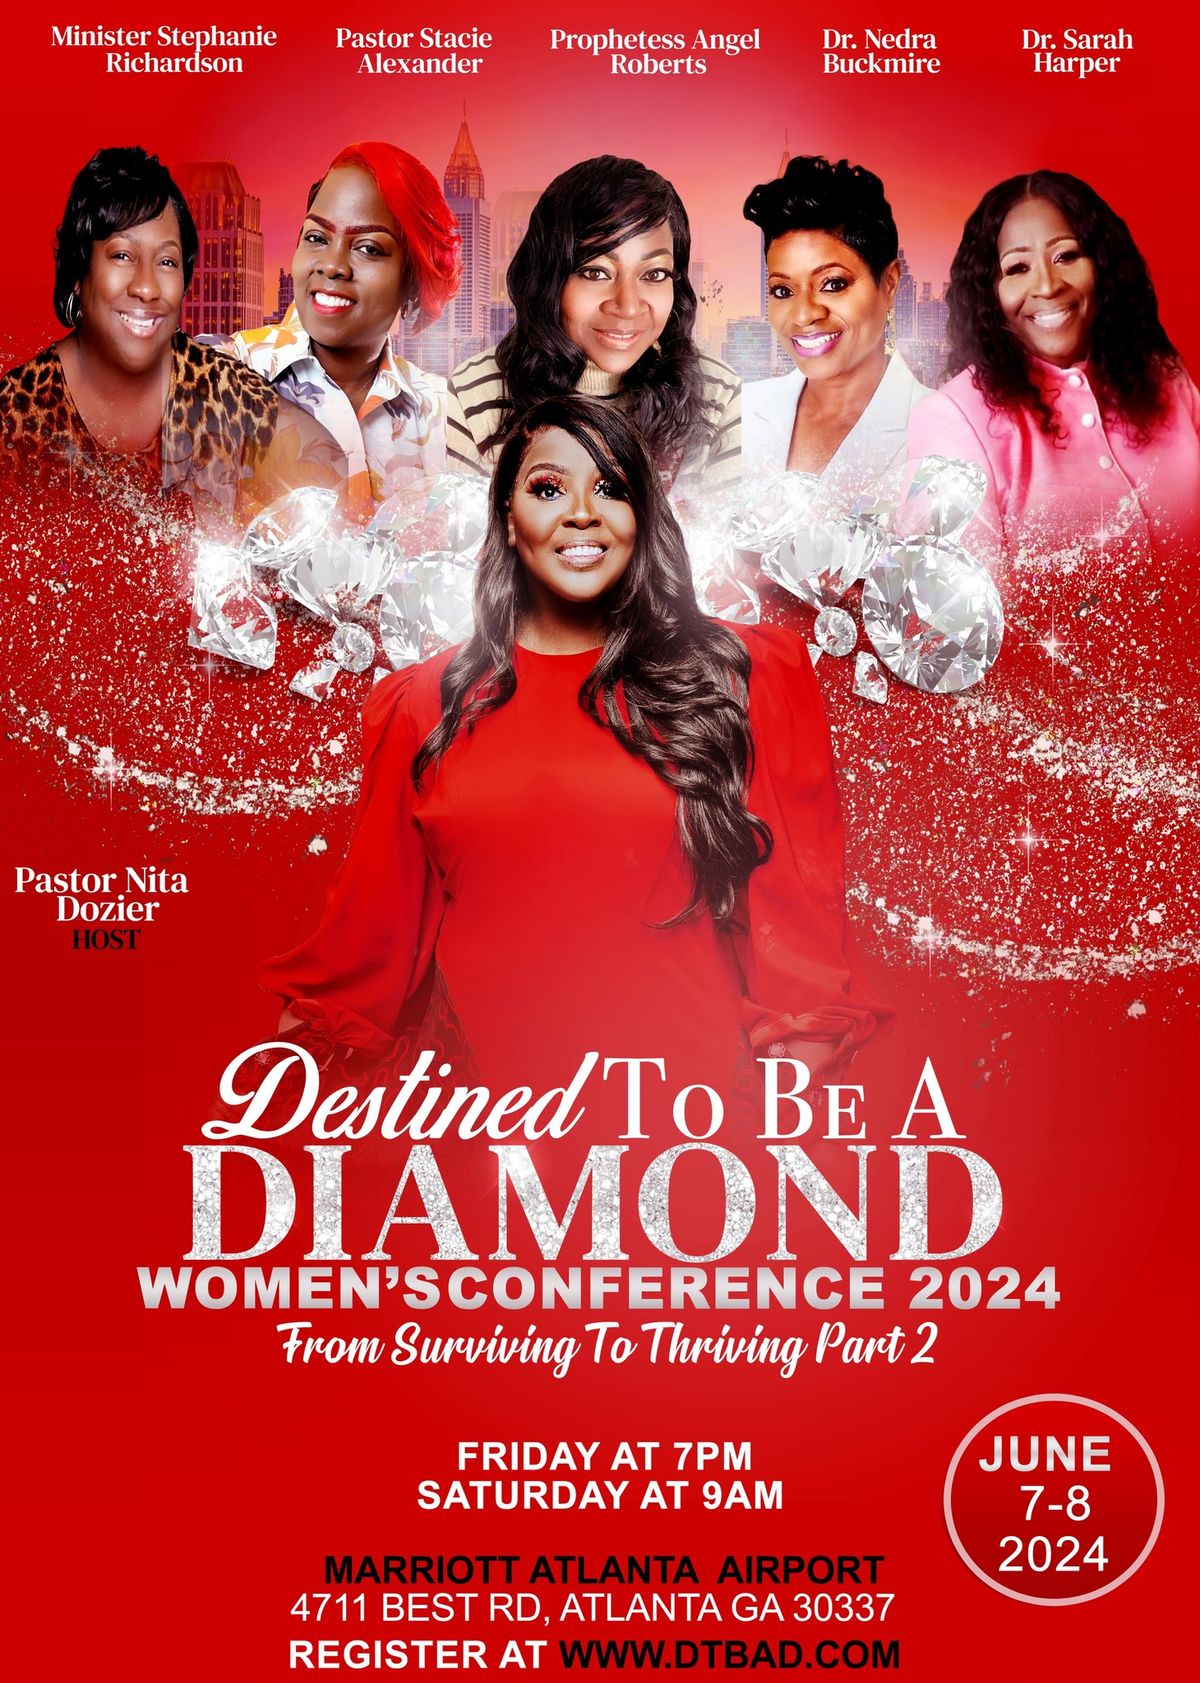 Destined To Be A Diamond Women's Conference 2024